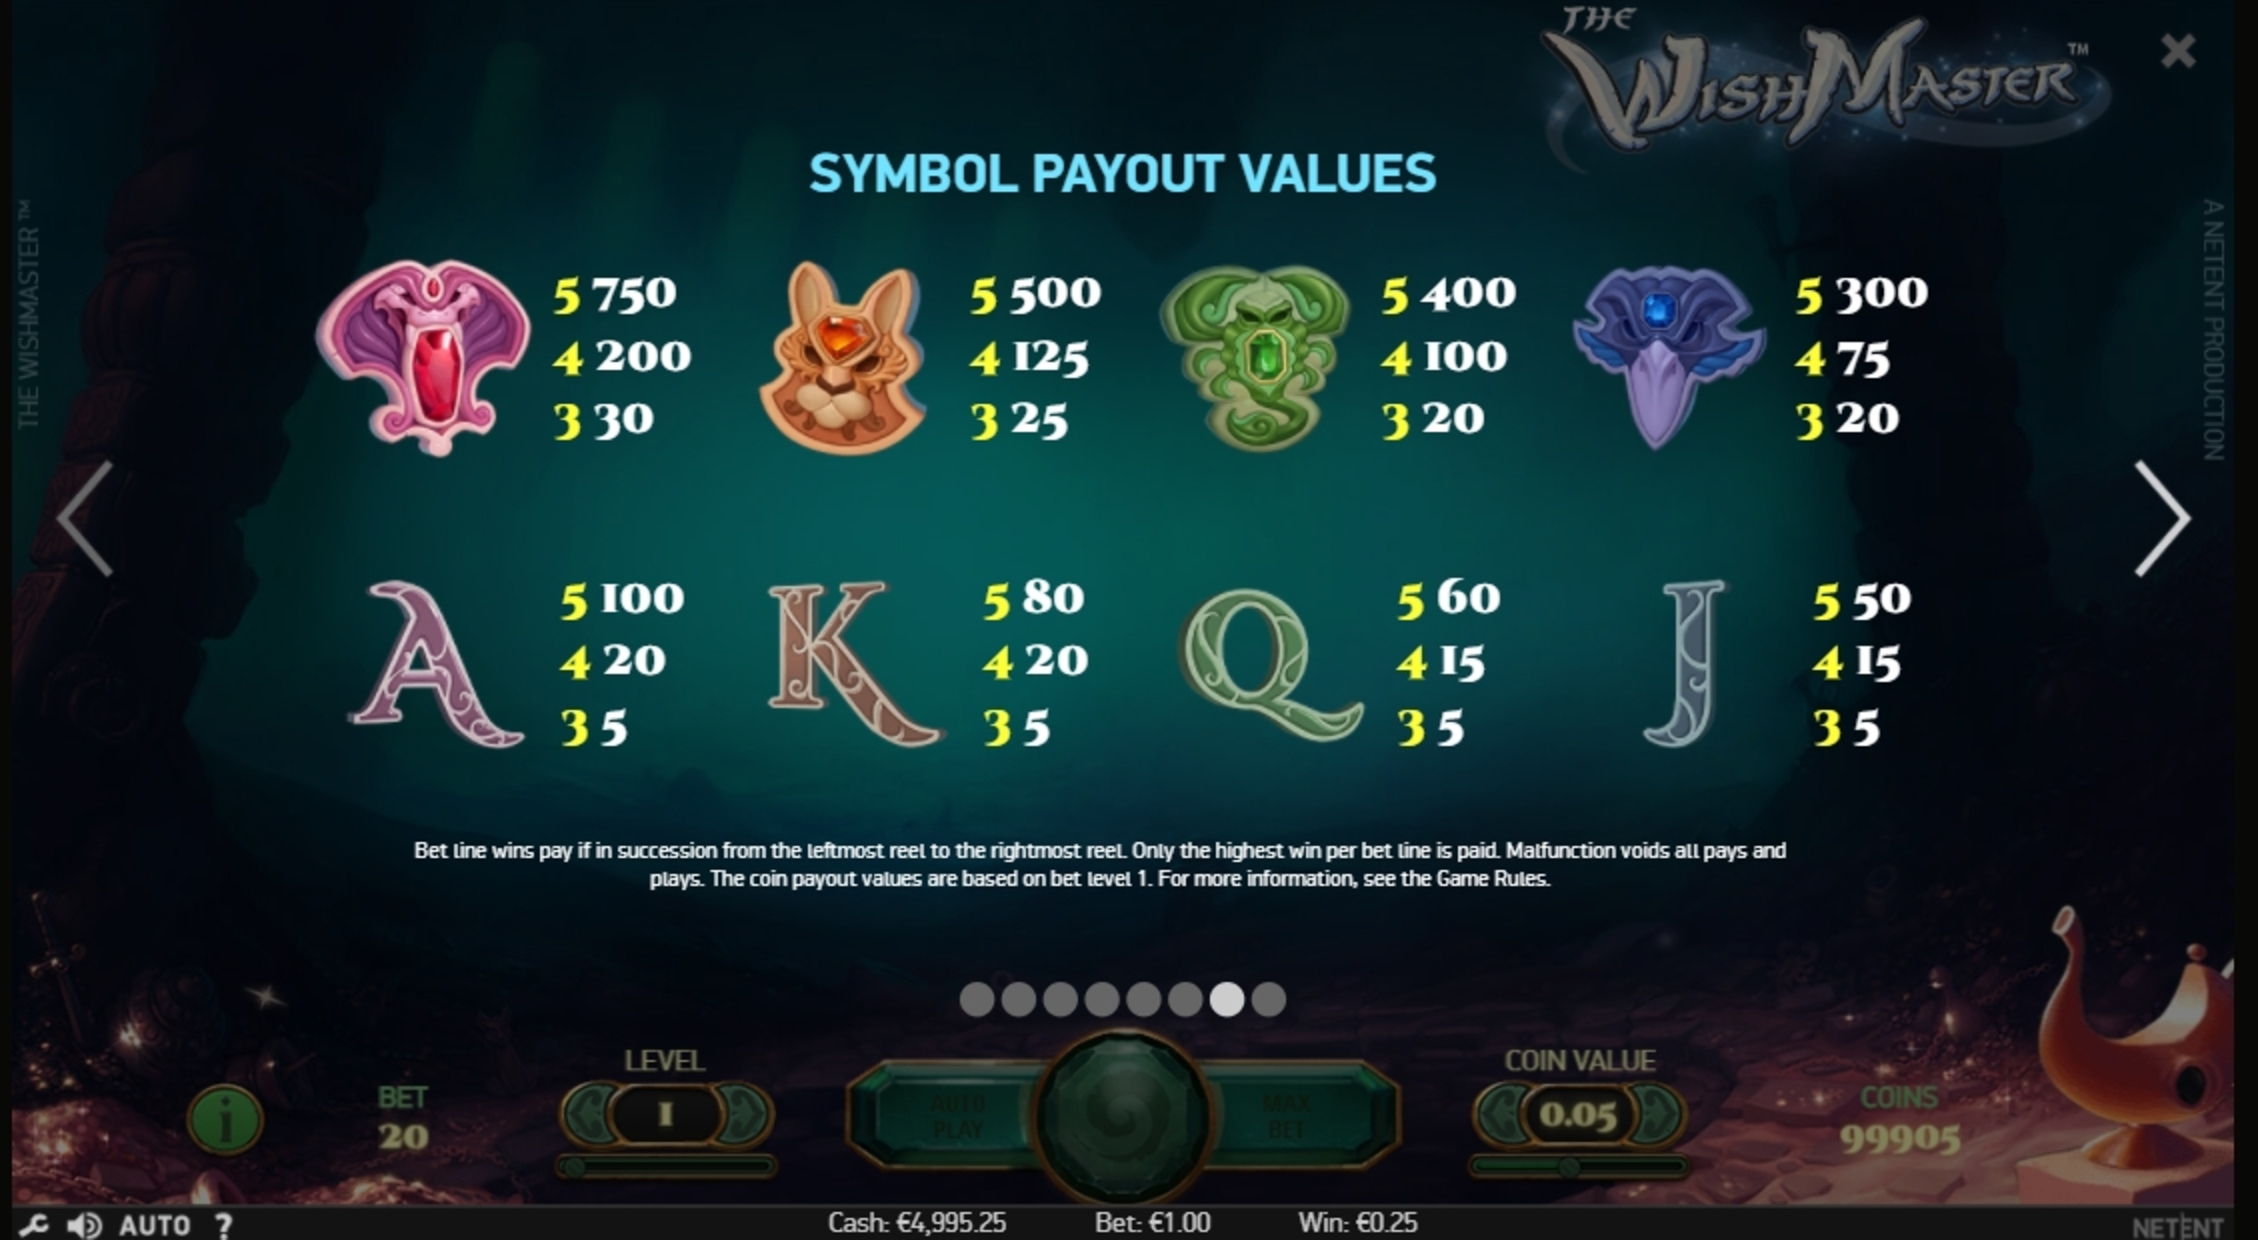 Info of The Wish Master Slot Game by NetEnt